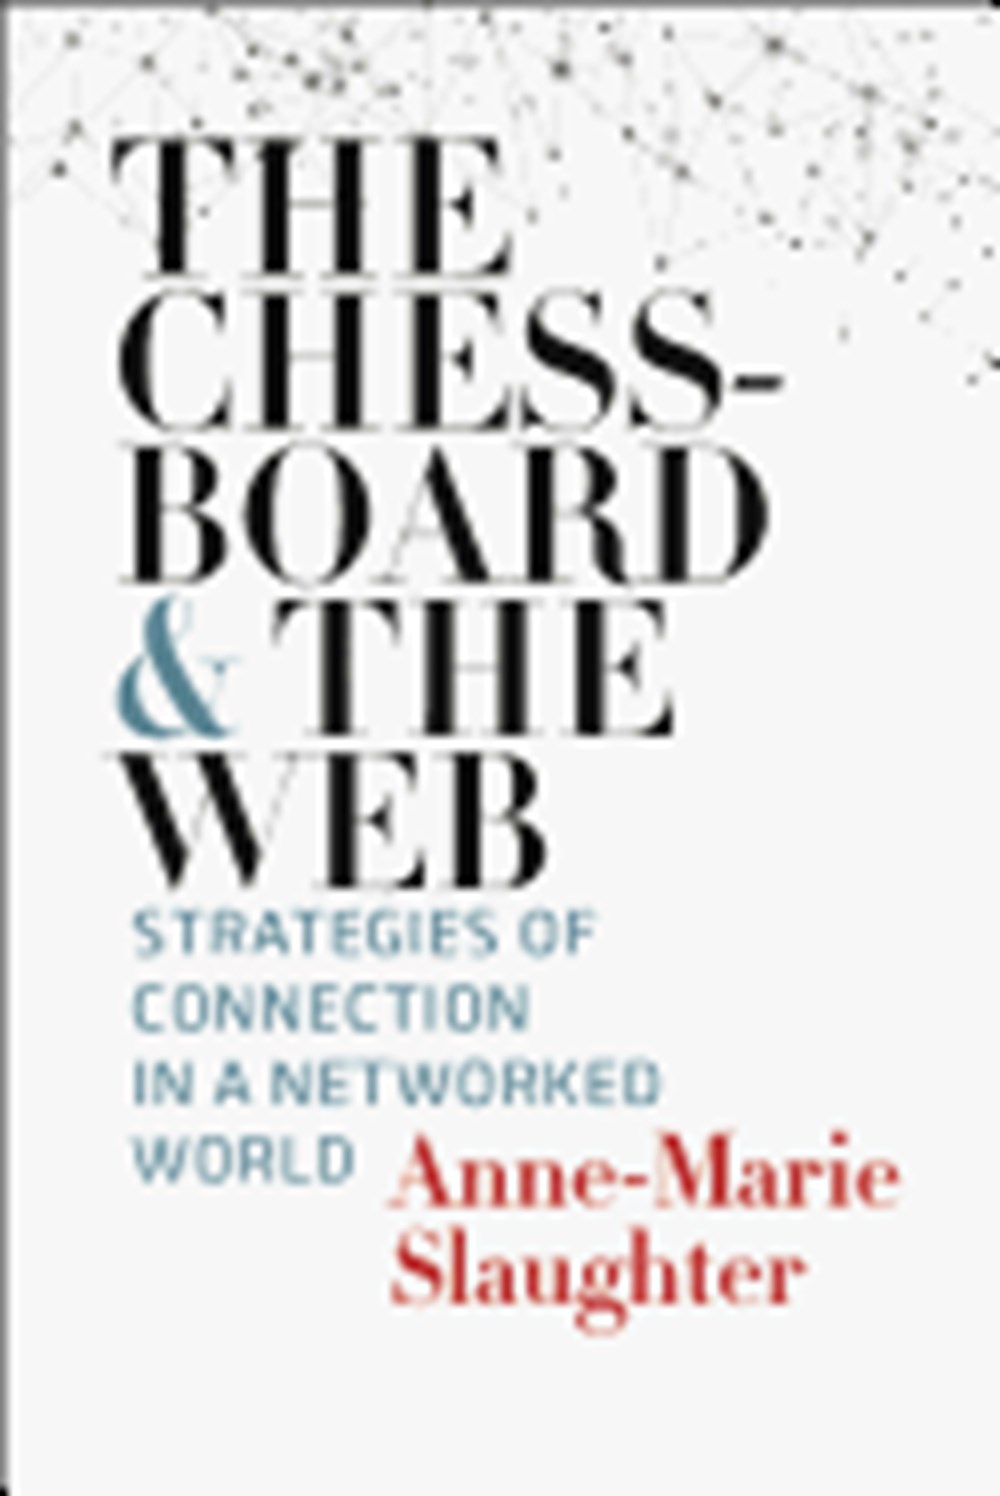 Chessboard and the Web Strategies of Connection in a Networked World